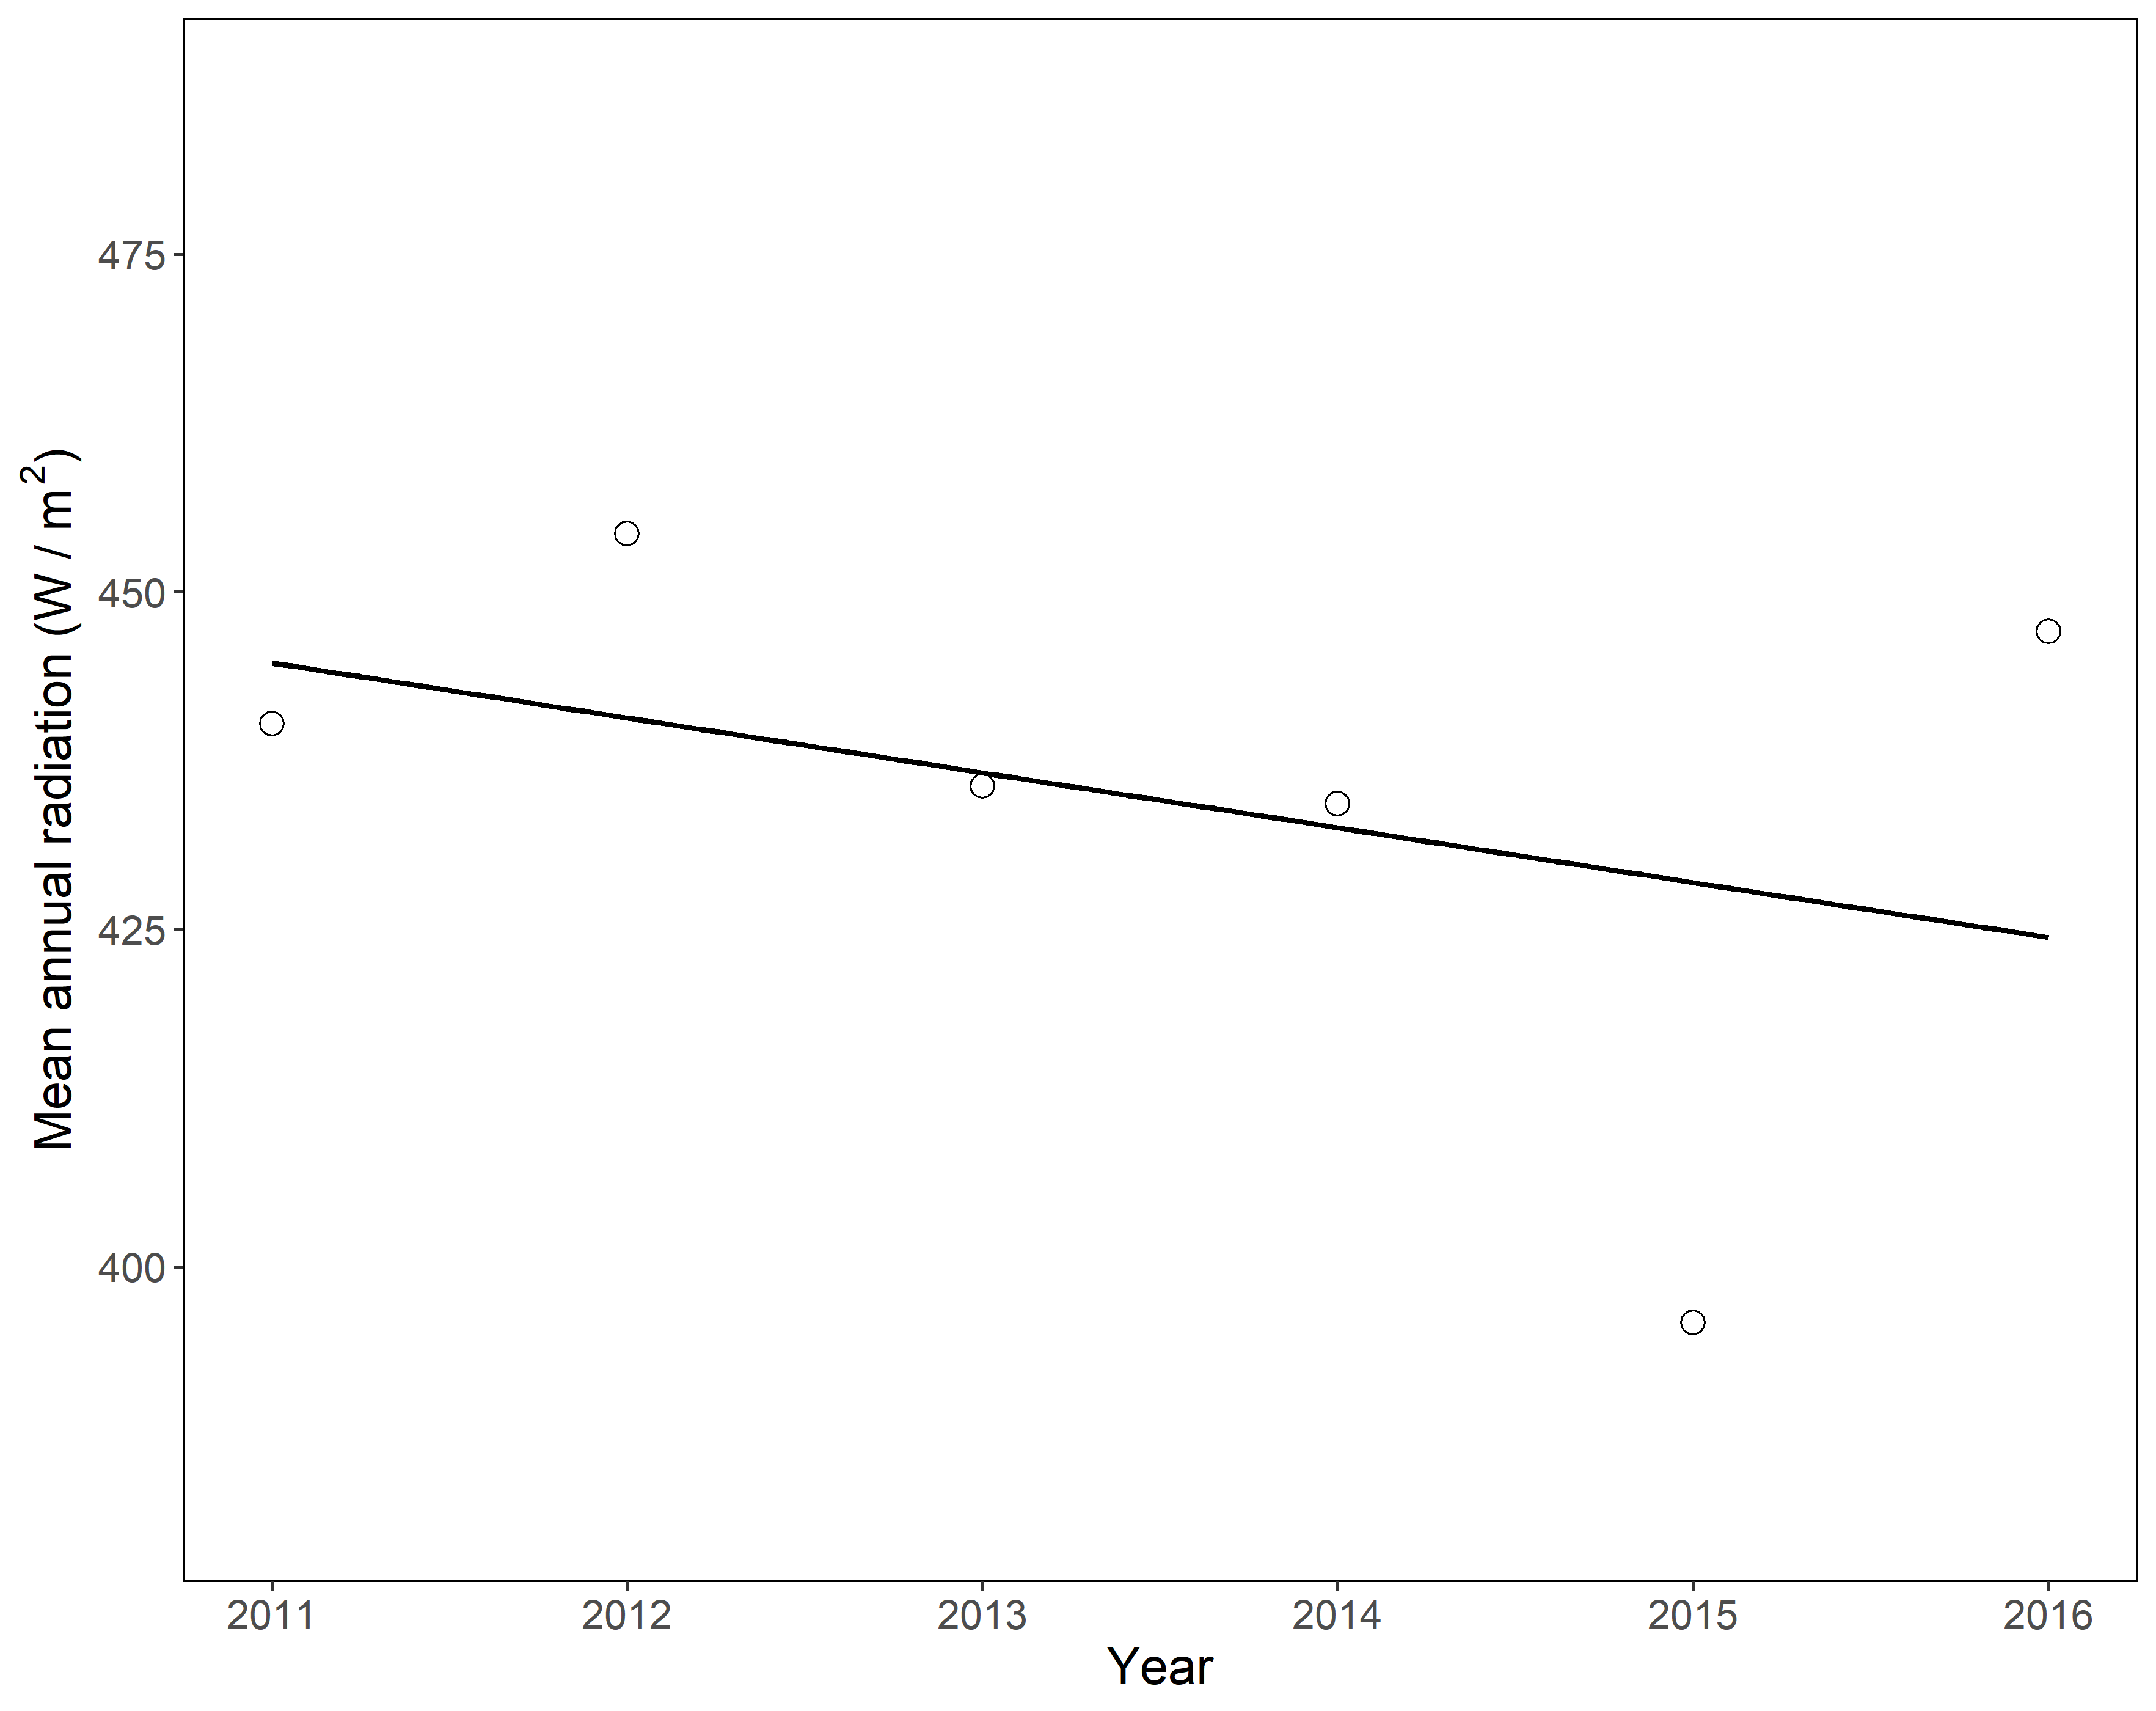 The yearly averages of solar radiation at Stannard Rock, MI, with a linear trendline to aid in visualization.